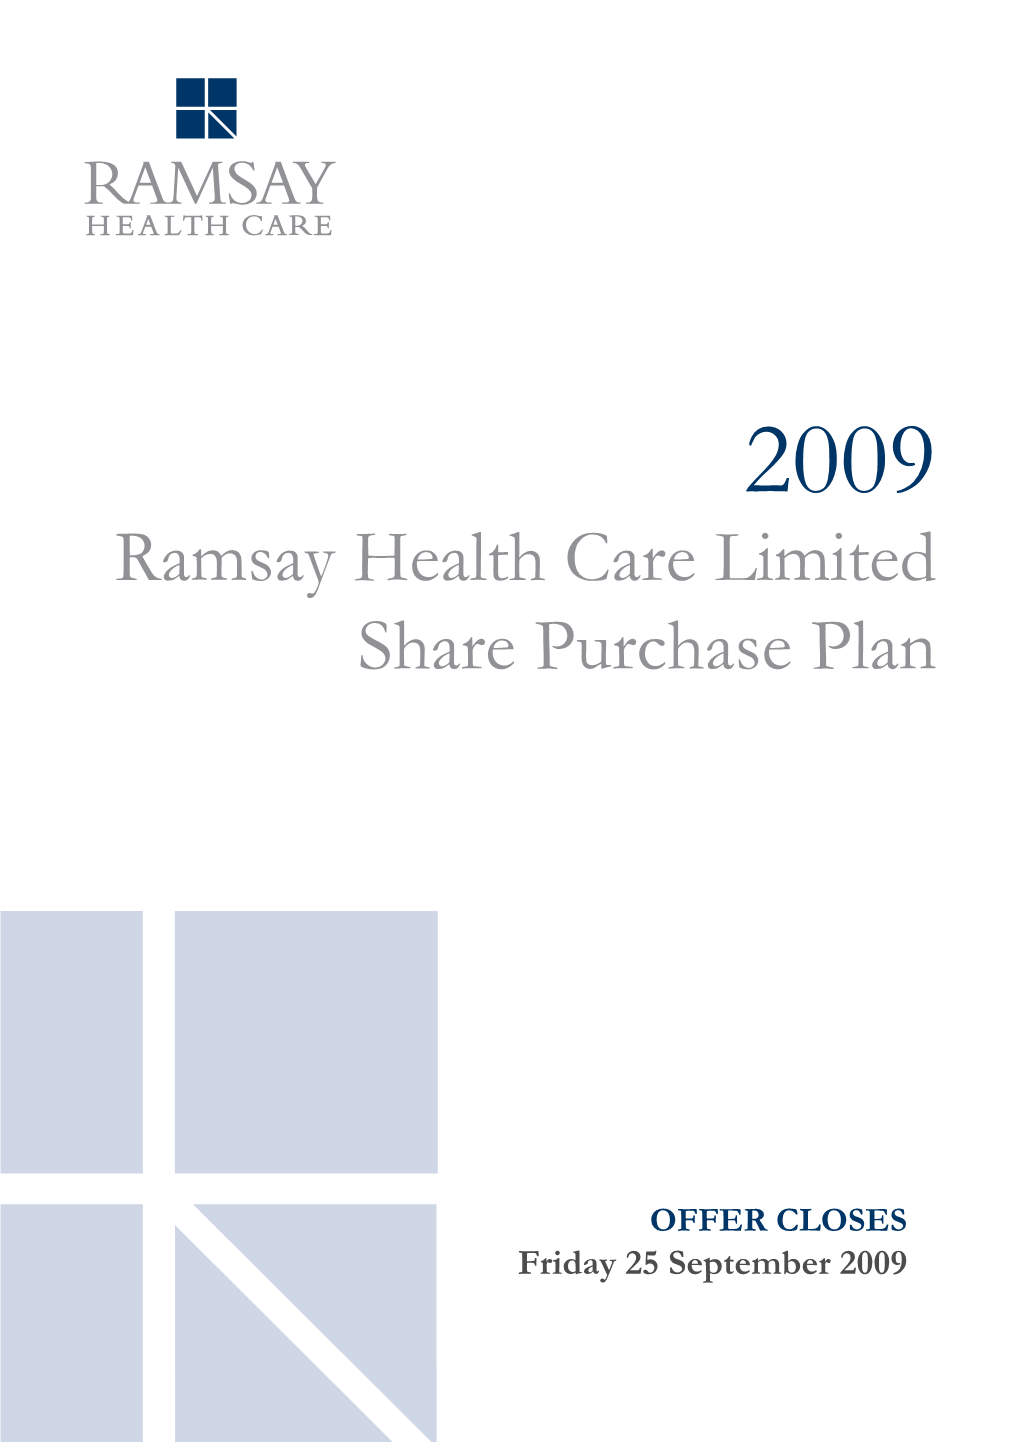 Ramsay Health Care Limited Share Purchase Plan